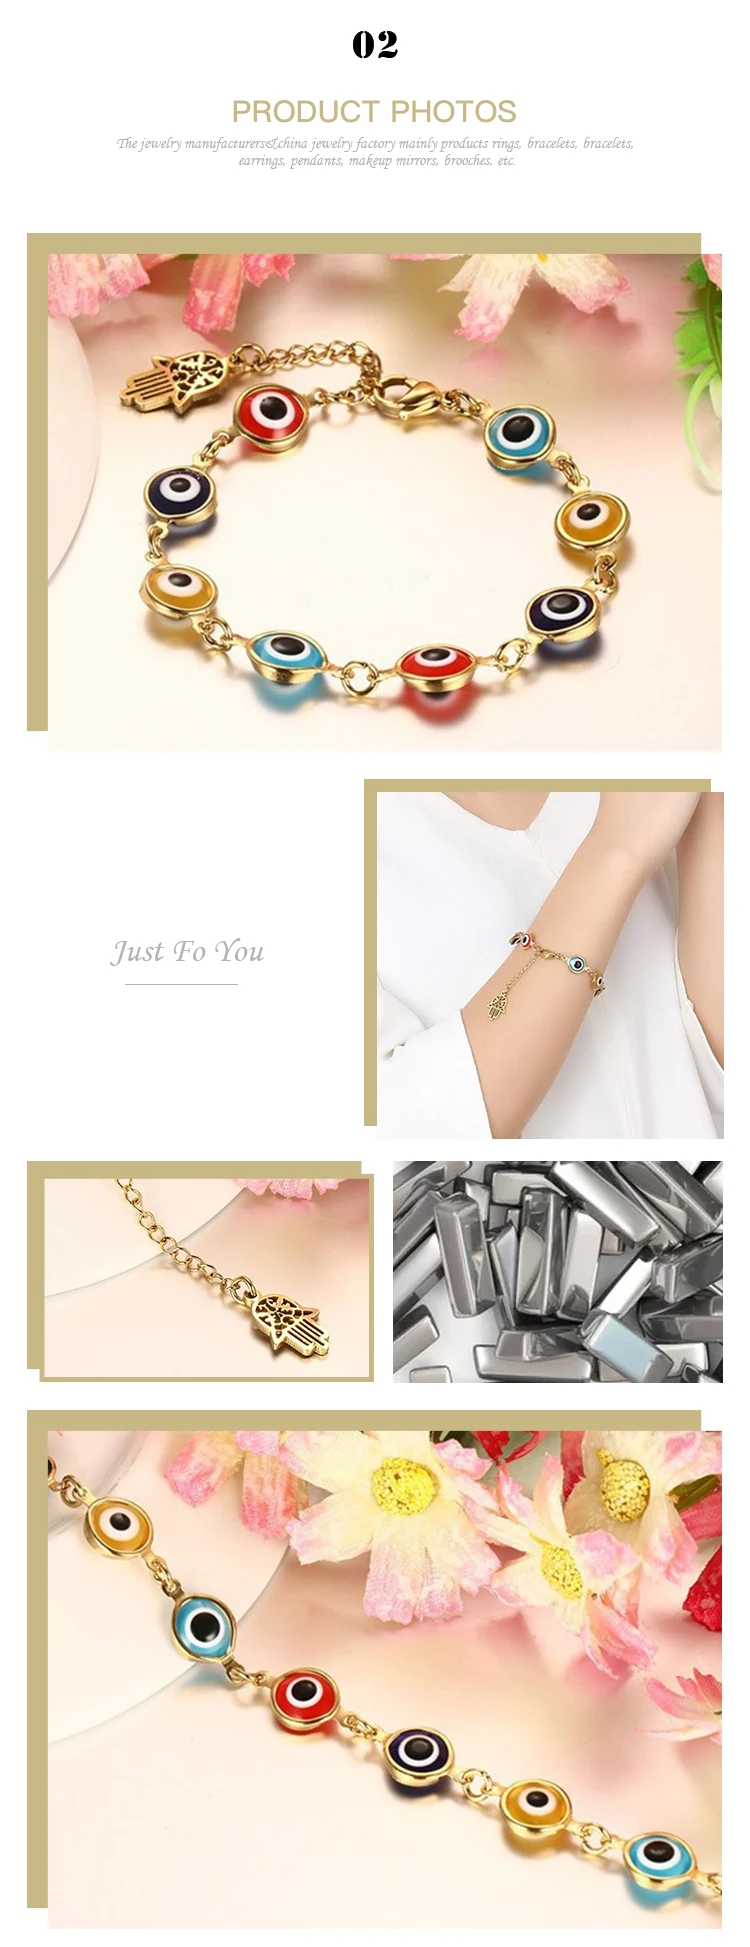 Wholesale 2020 New Design 8mm stainless steel colorful glass beads gold bracelet 326